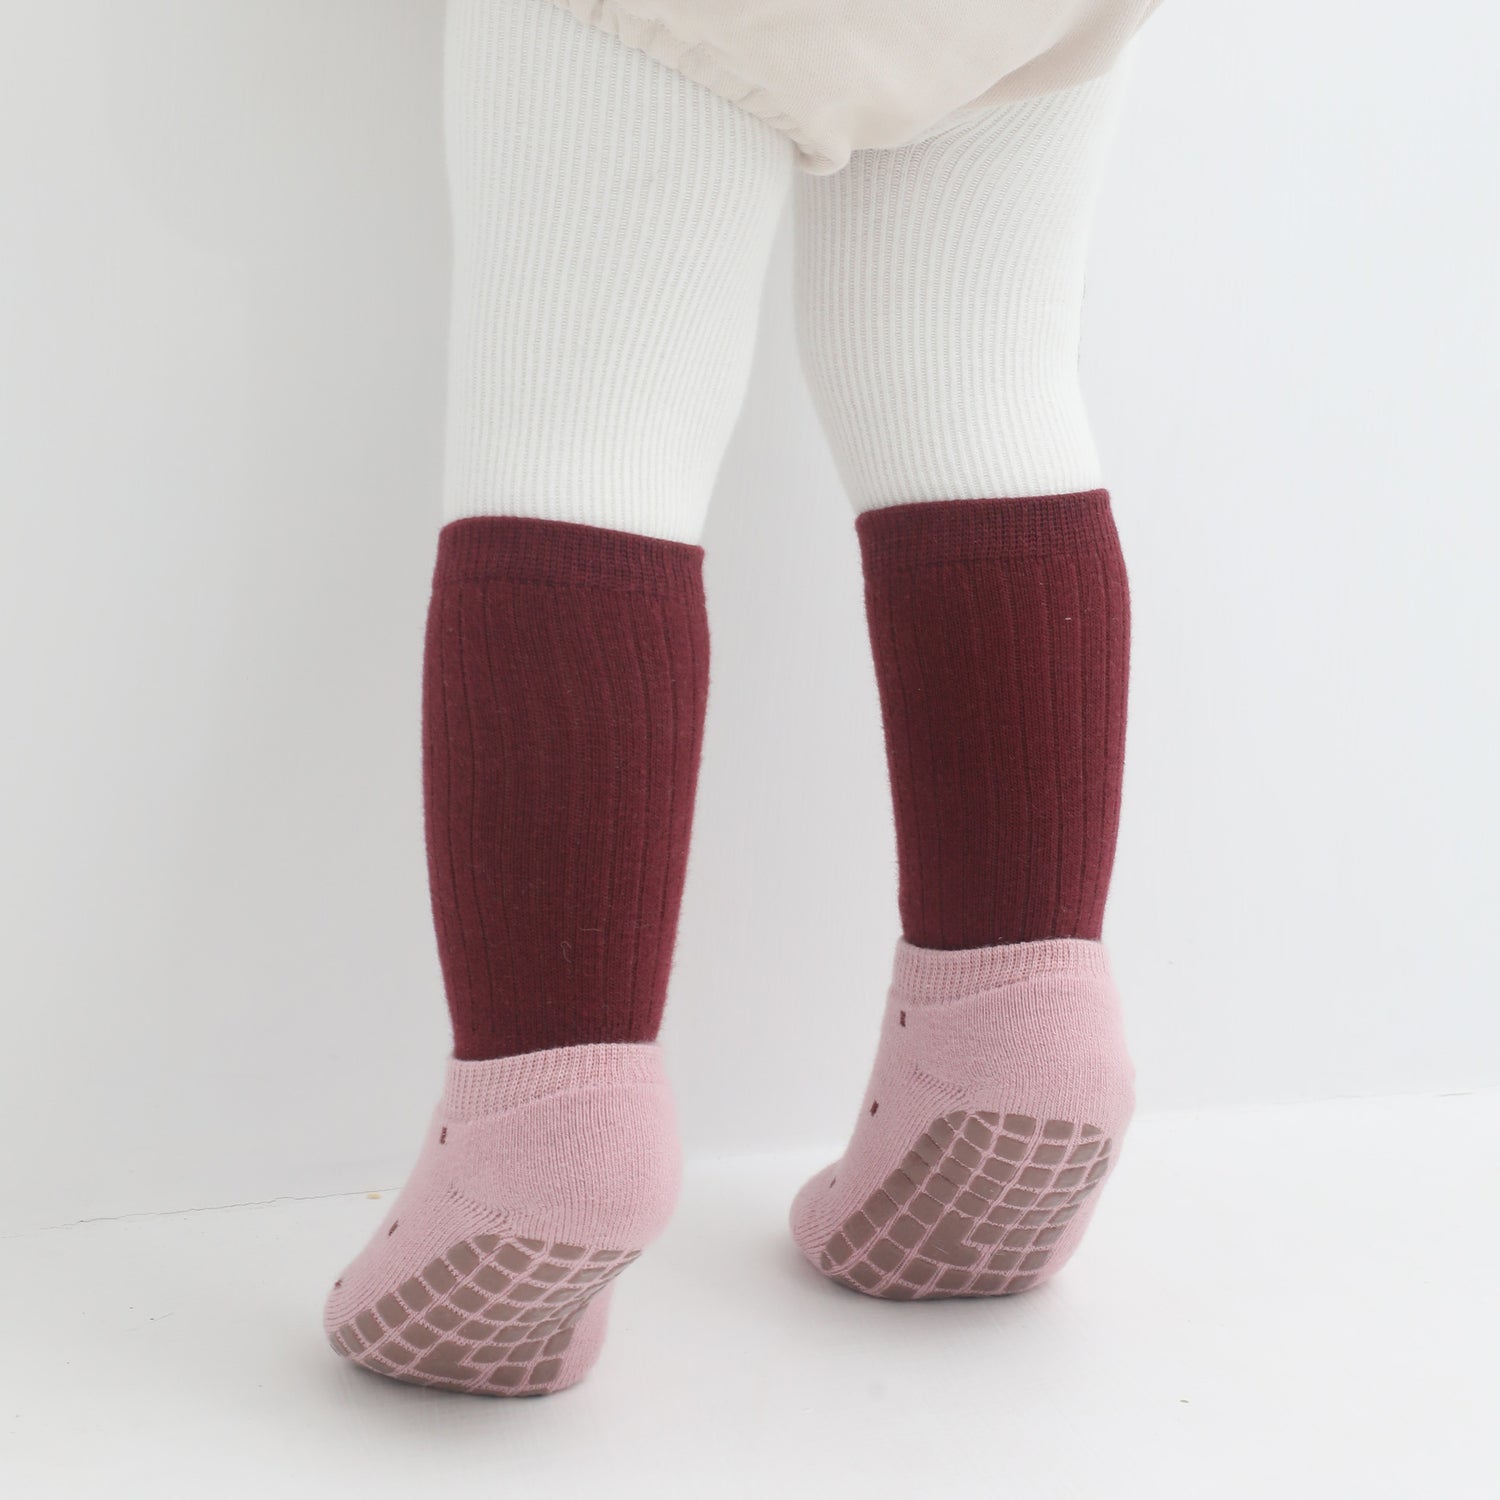 Toddler-friendly low-cut floor socks with anti-slip design for safe indoor play.